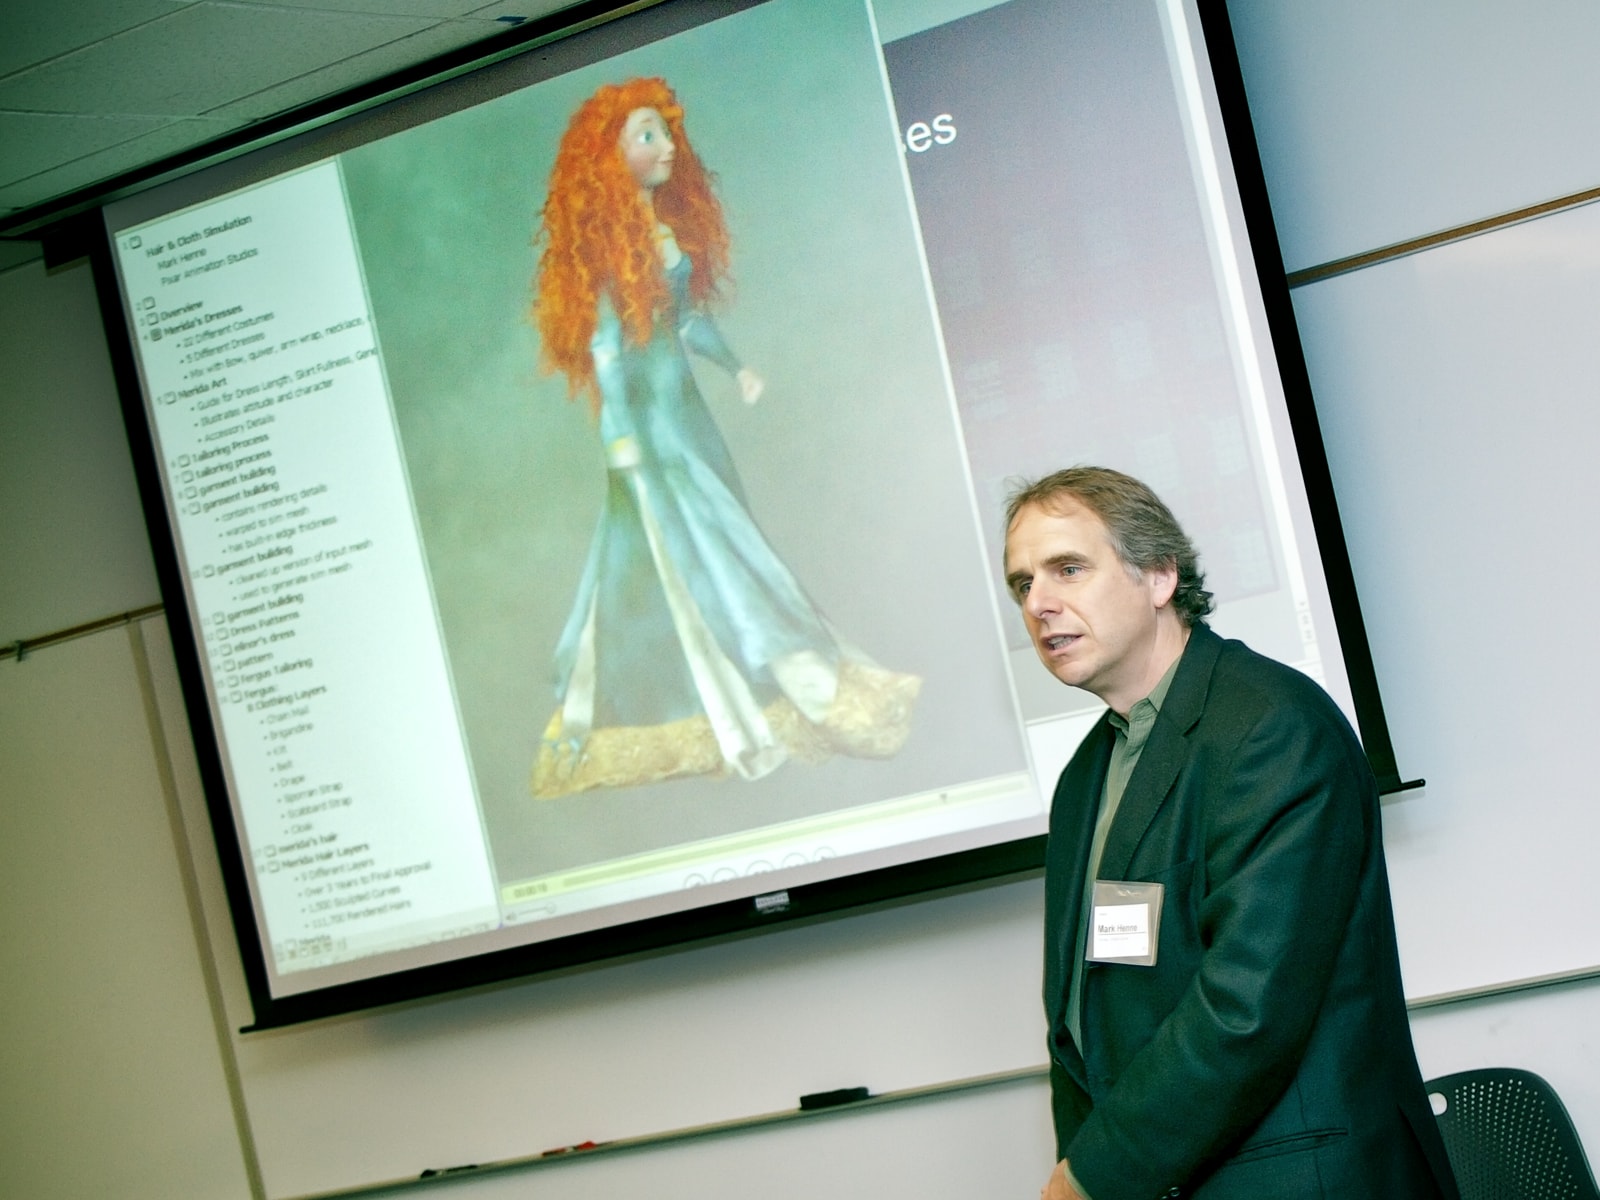 Pixar's Mark Henne speaking in front of a screen showing Princess Merida from the animated movie Brave